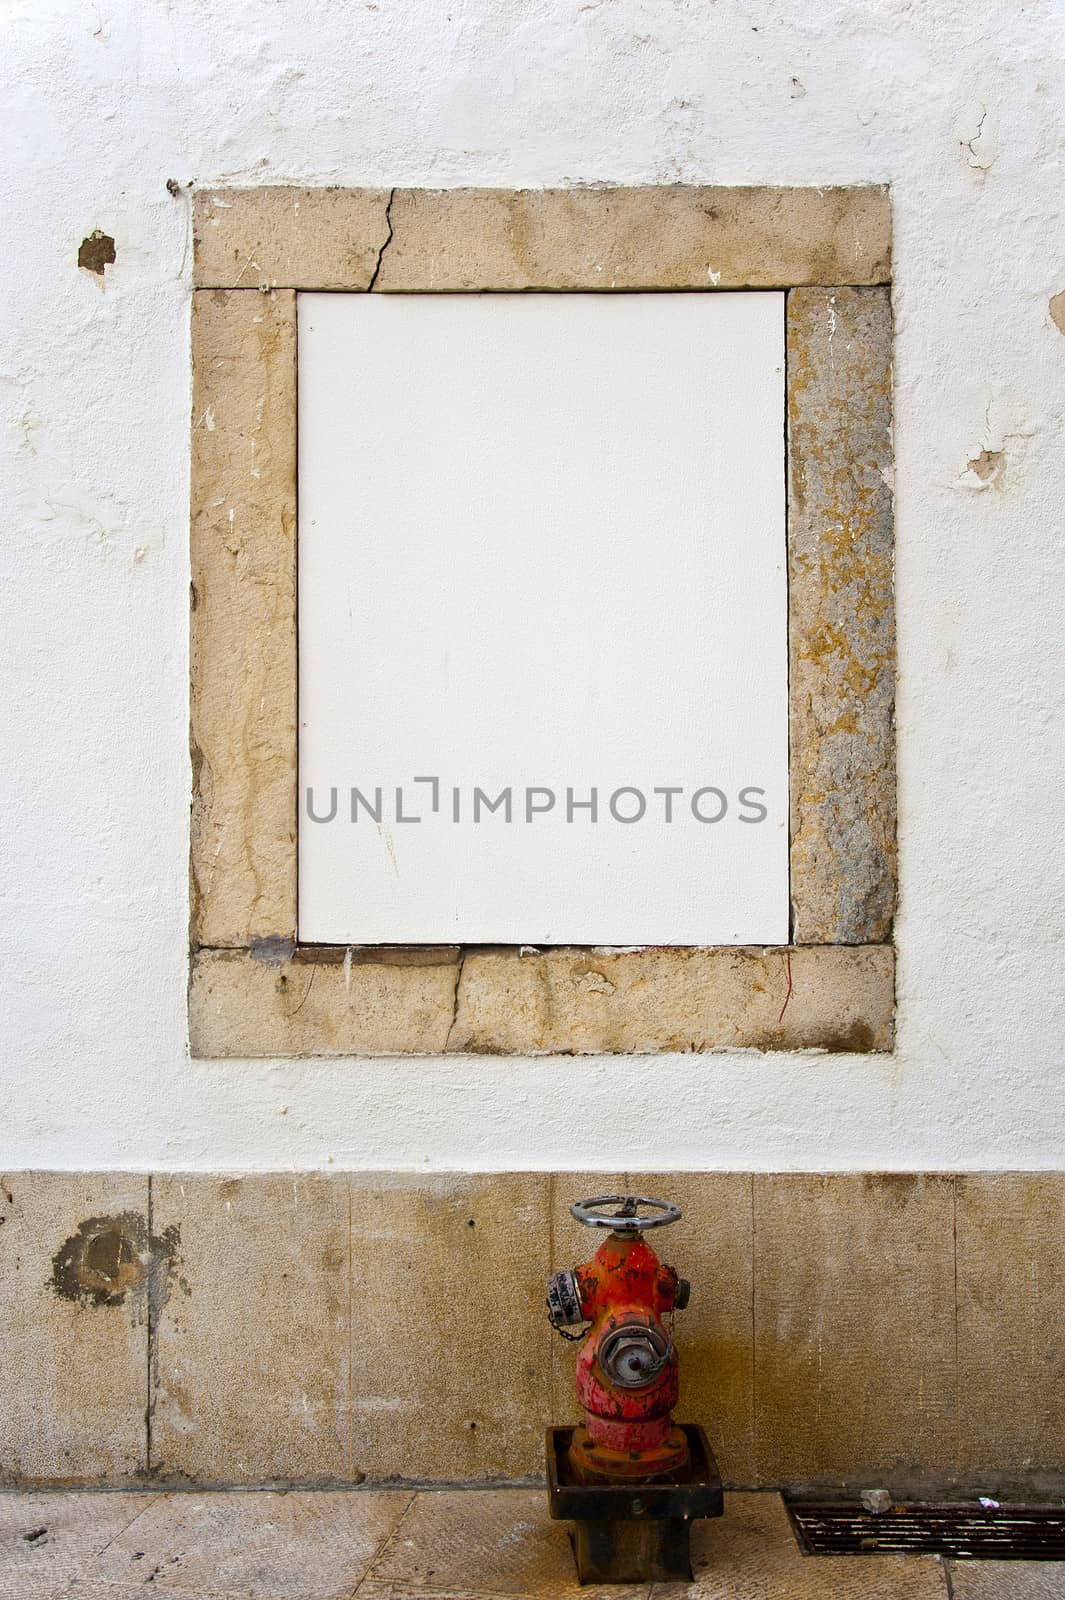 White copyspace in a stone frame with a red hydrant